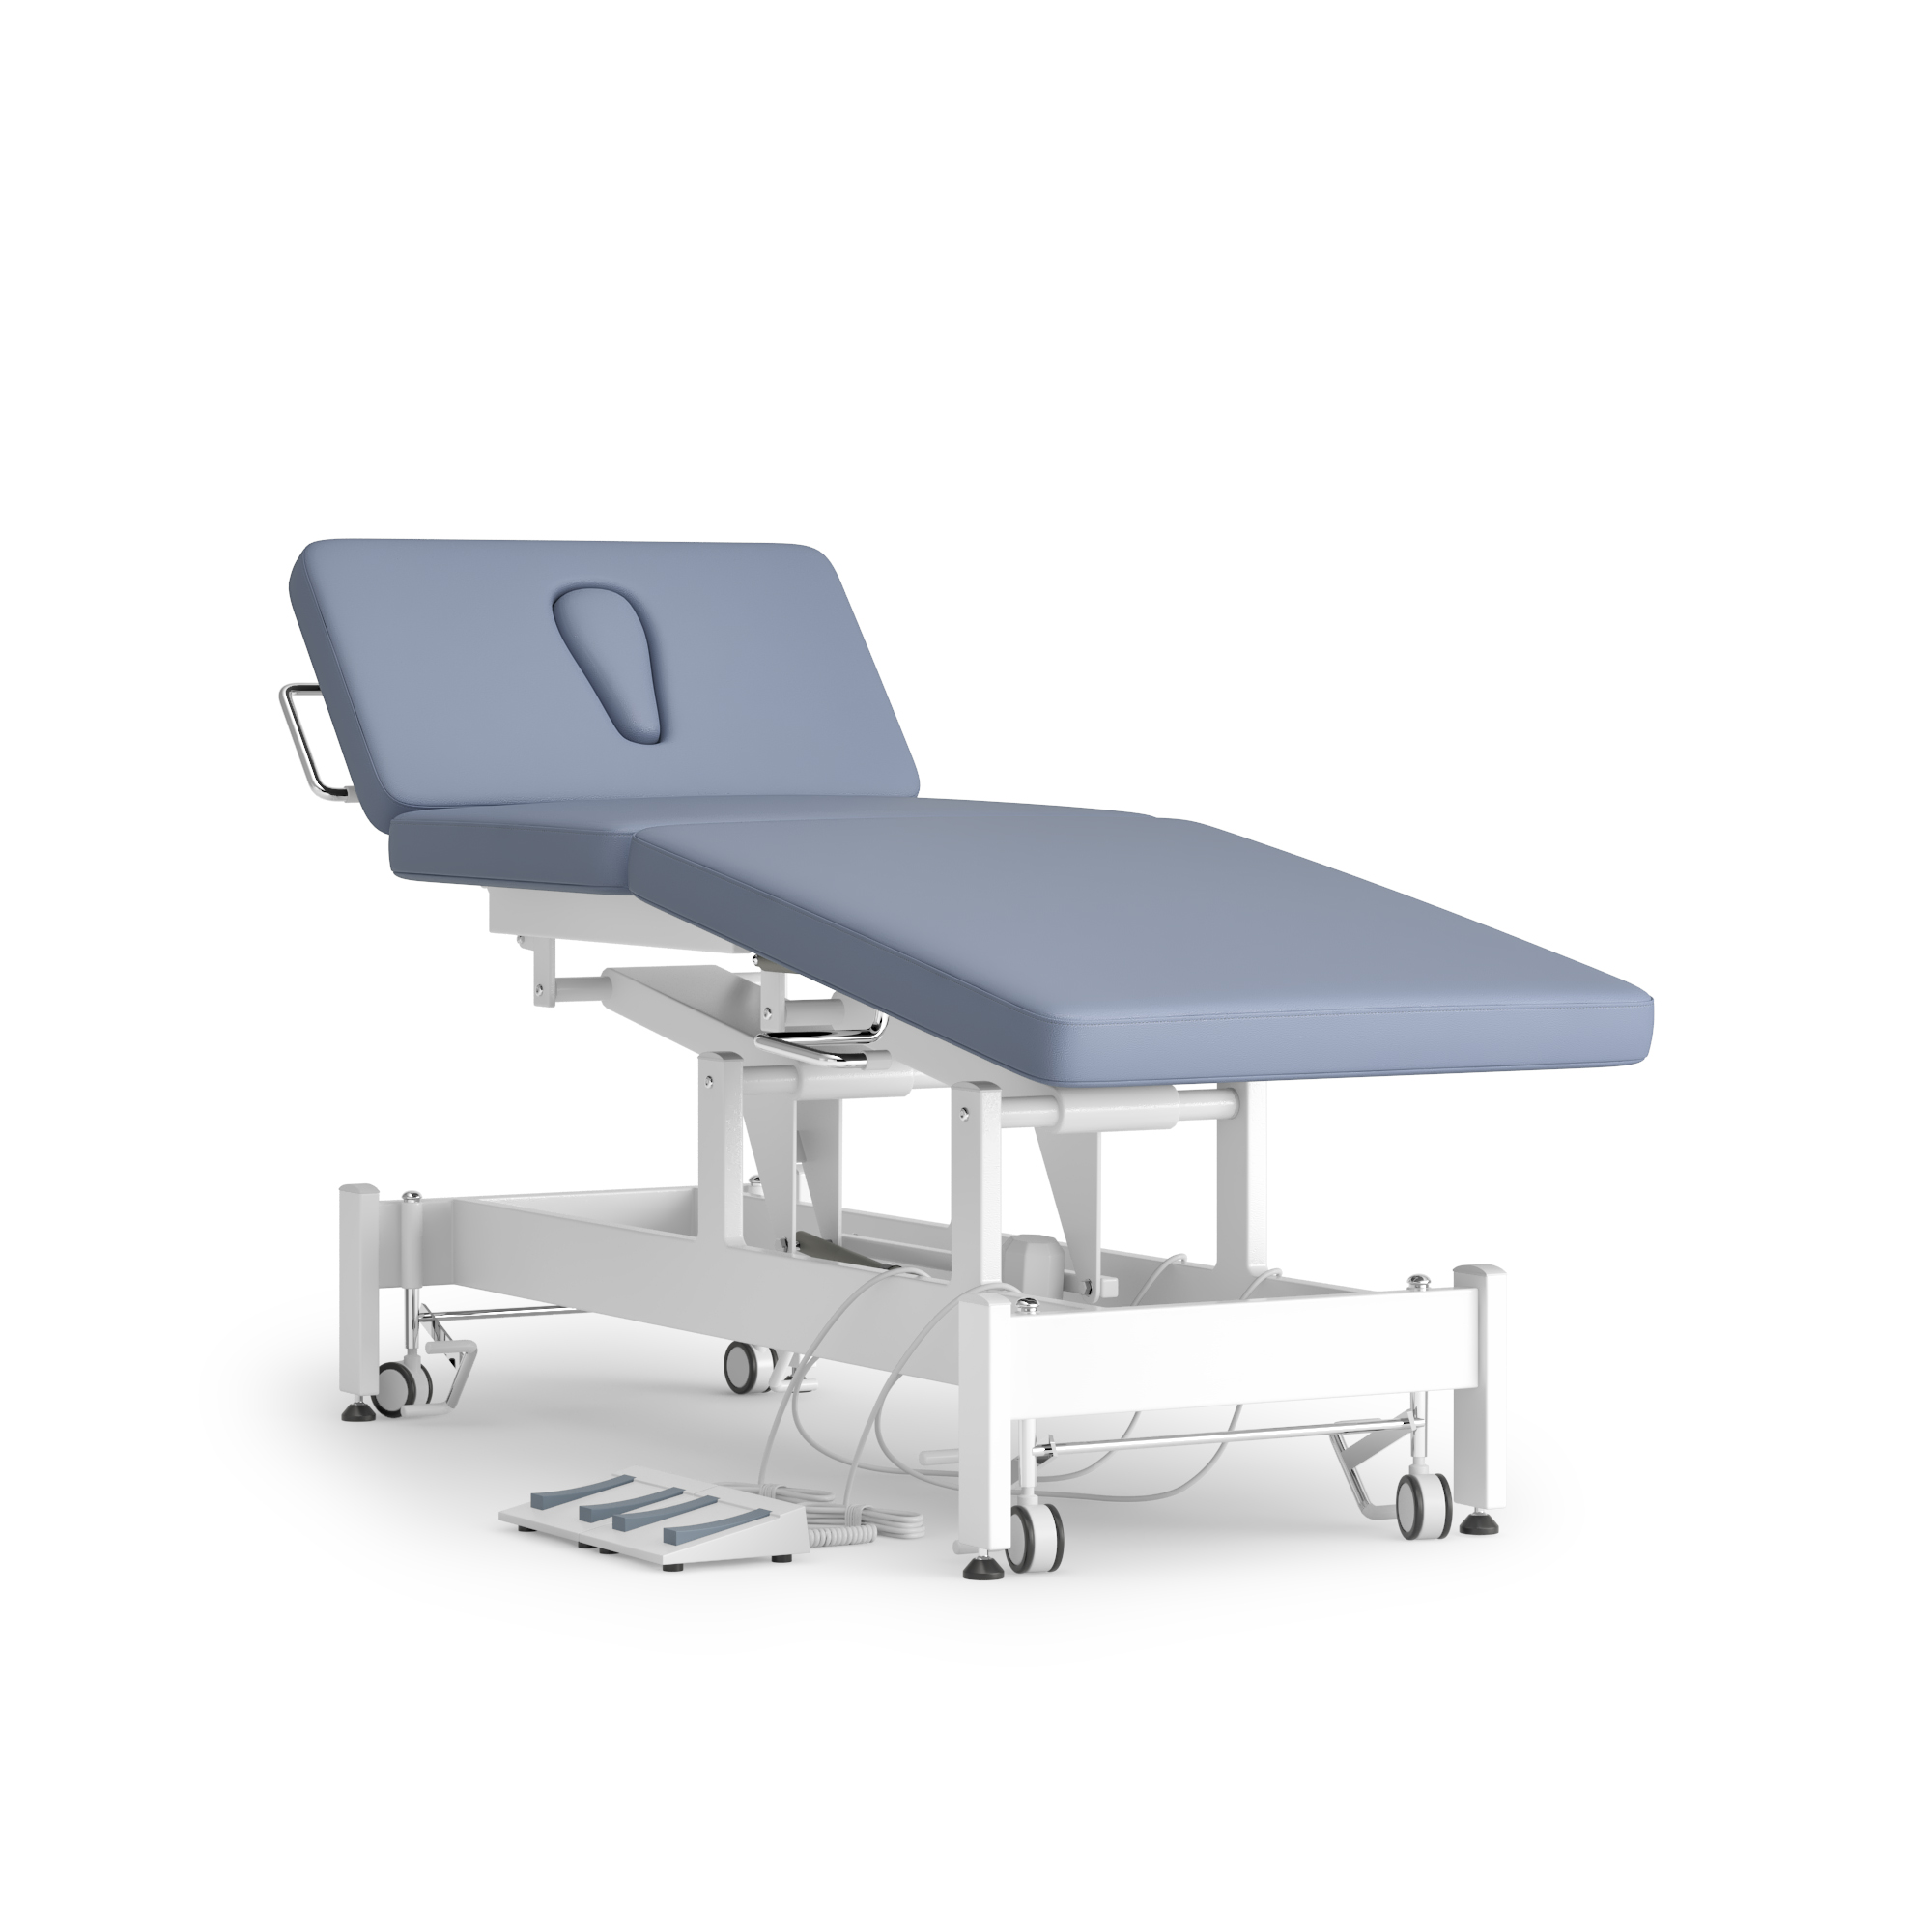 3 Section Medistar Electric Treatment Table - Raised Centre